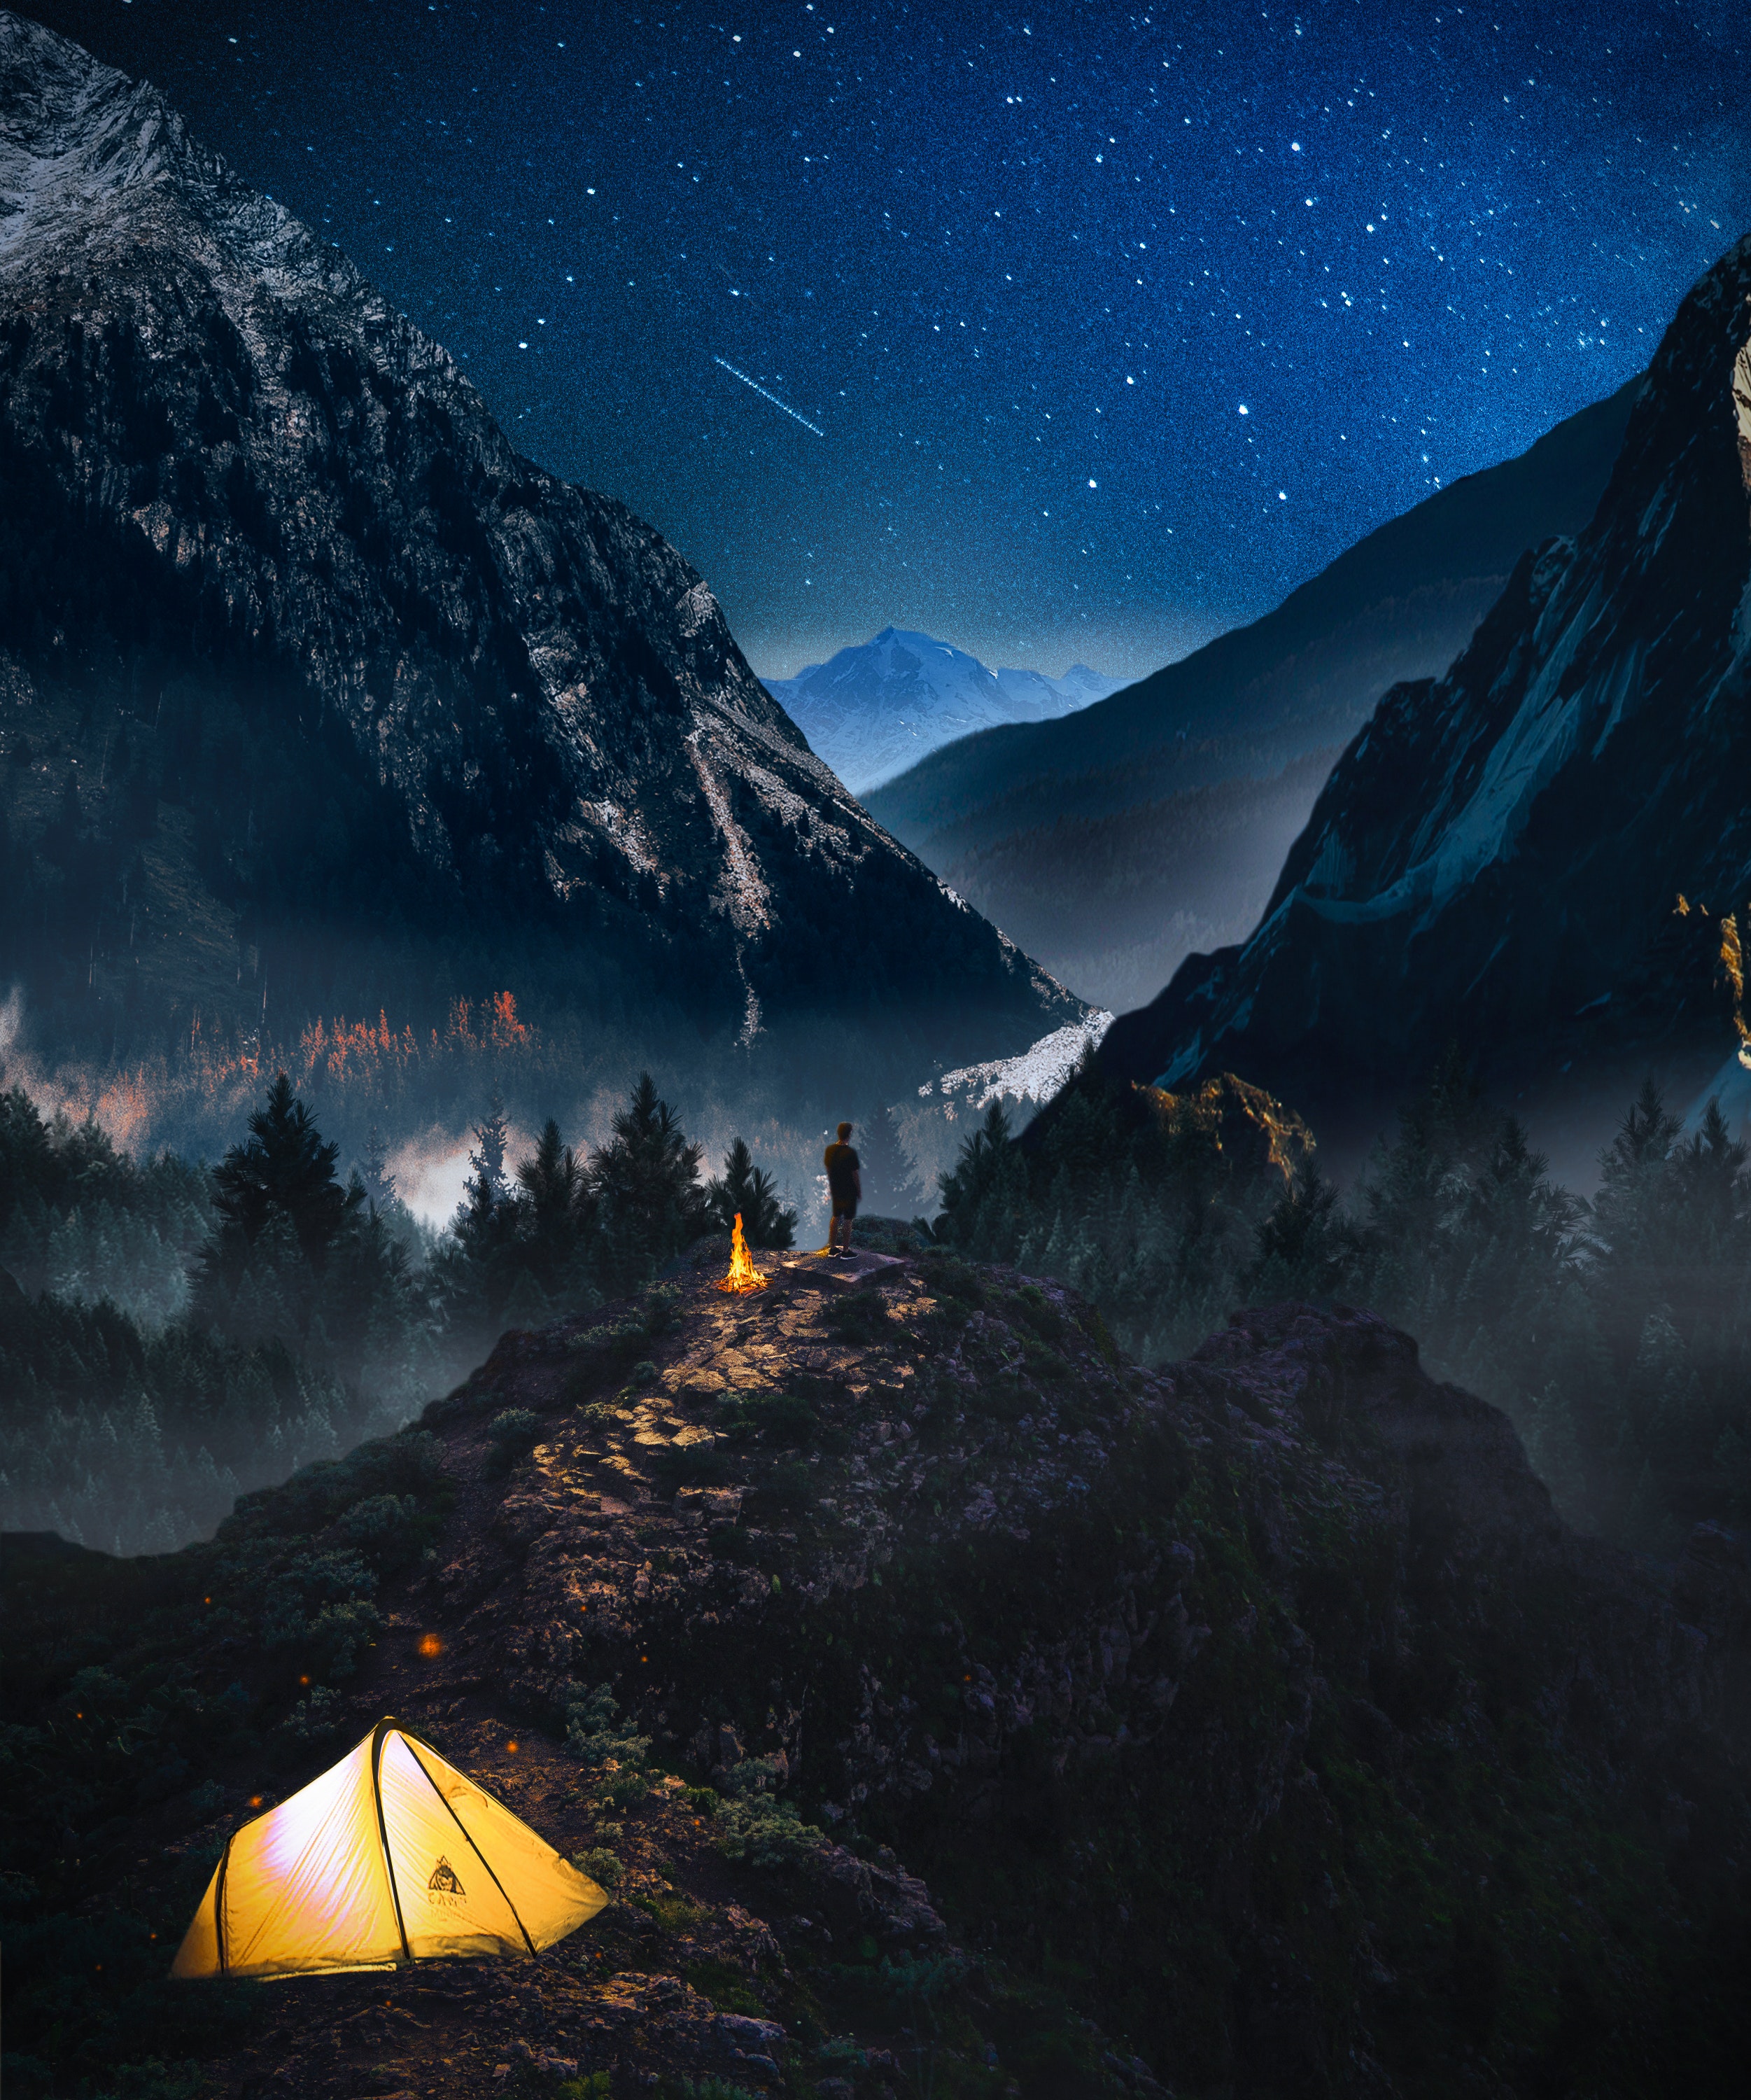 photoshop, starry sky, camping, campsite, loneliness, mountains, nature cellphone